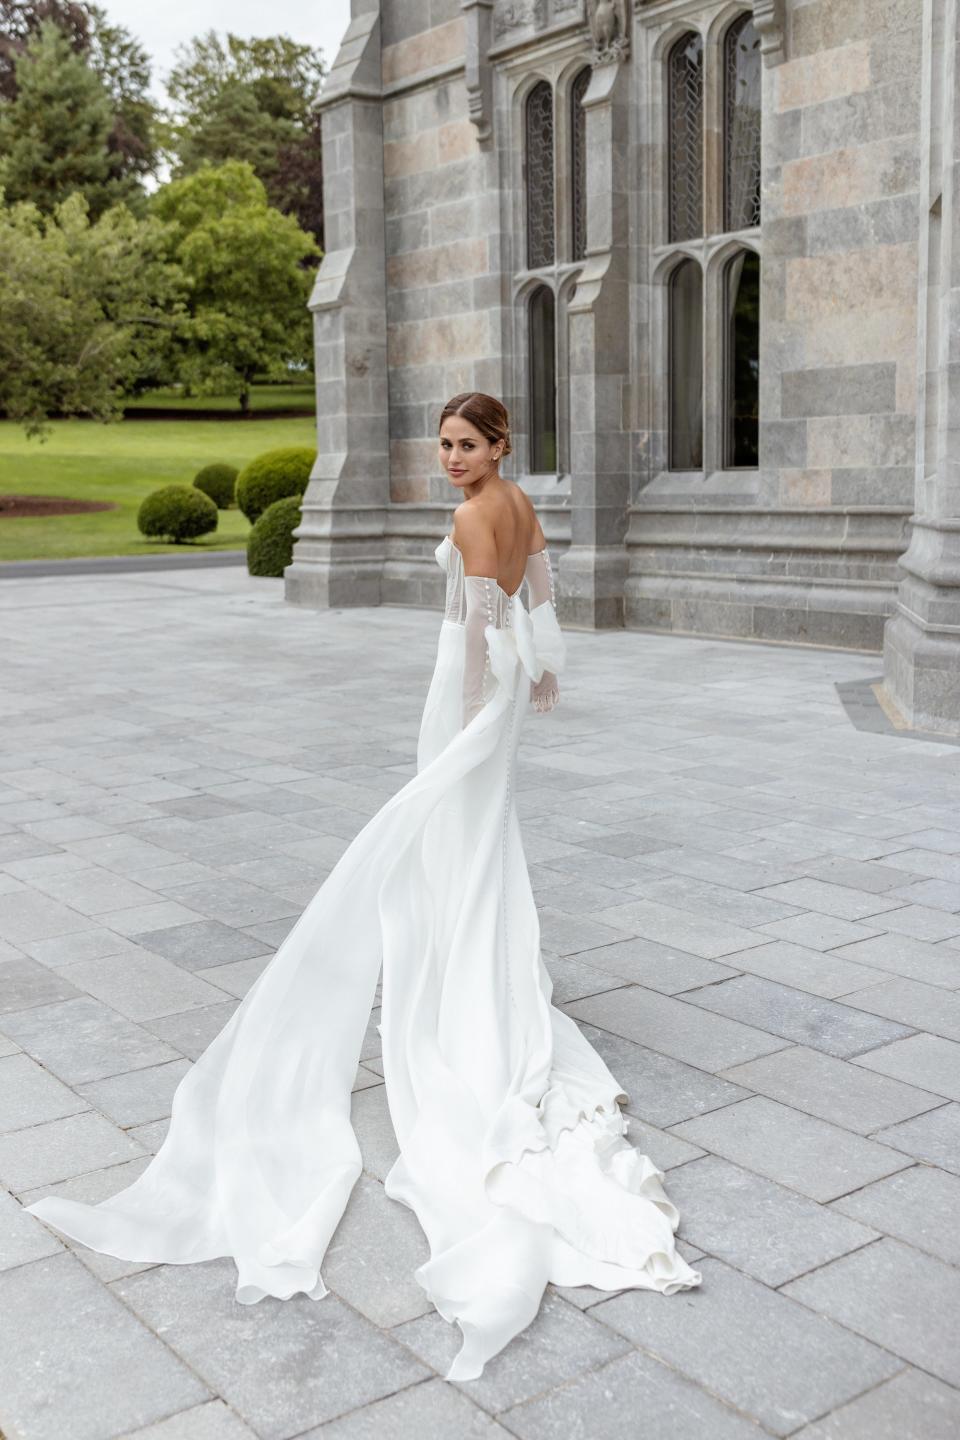 A bride looks over shoulder in front of a stone building.